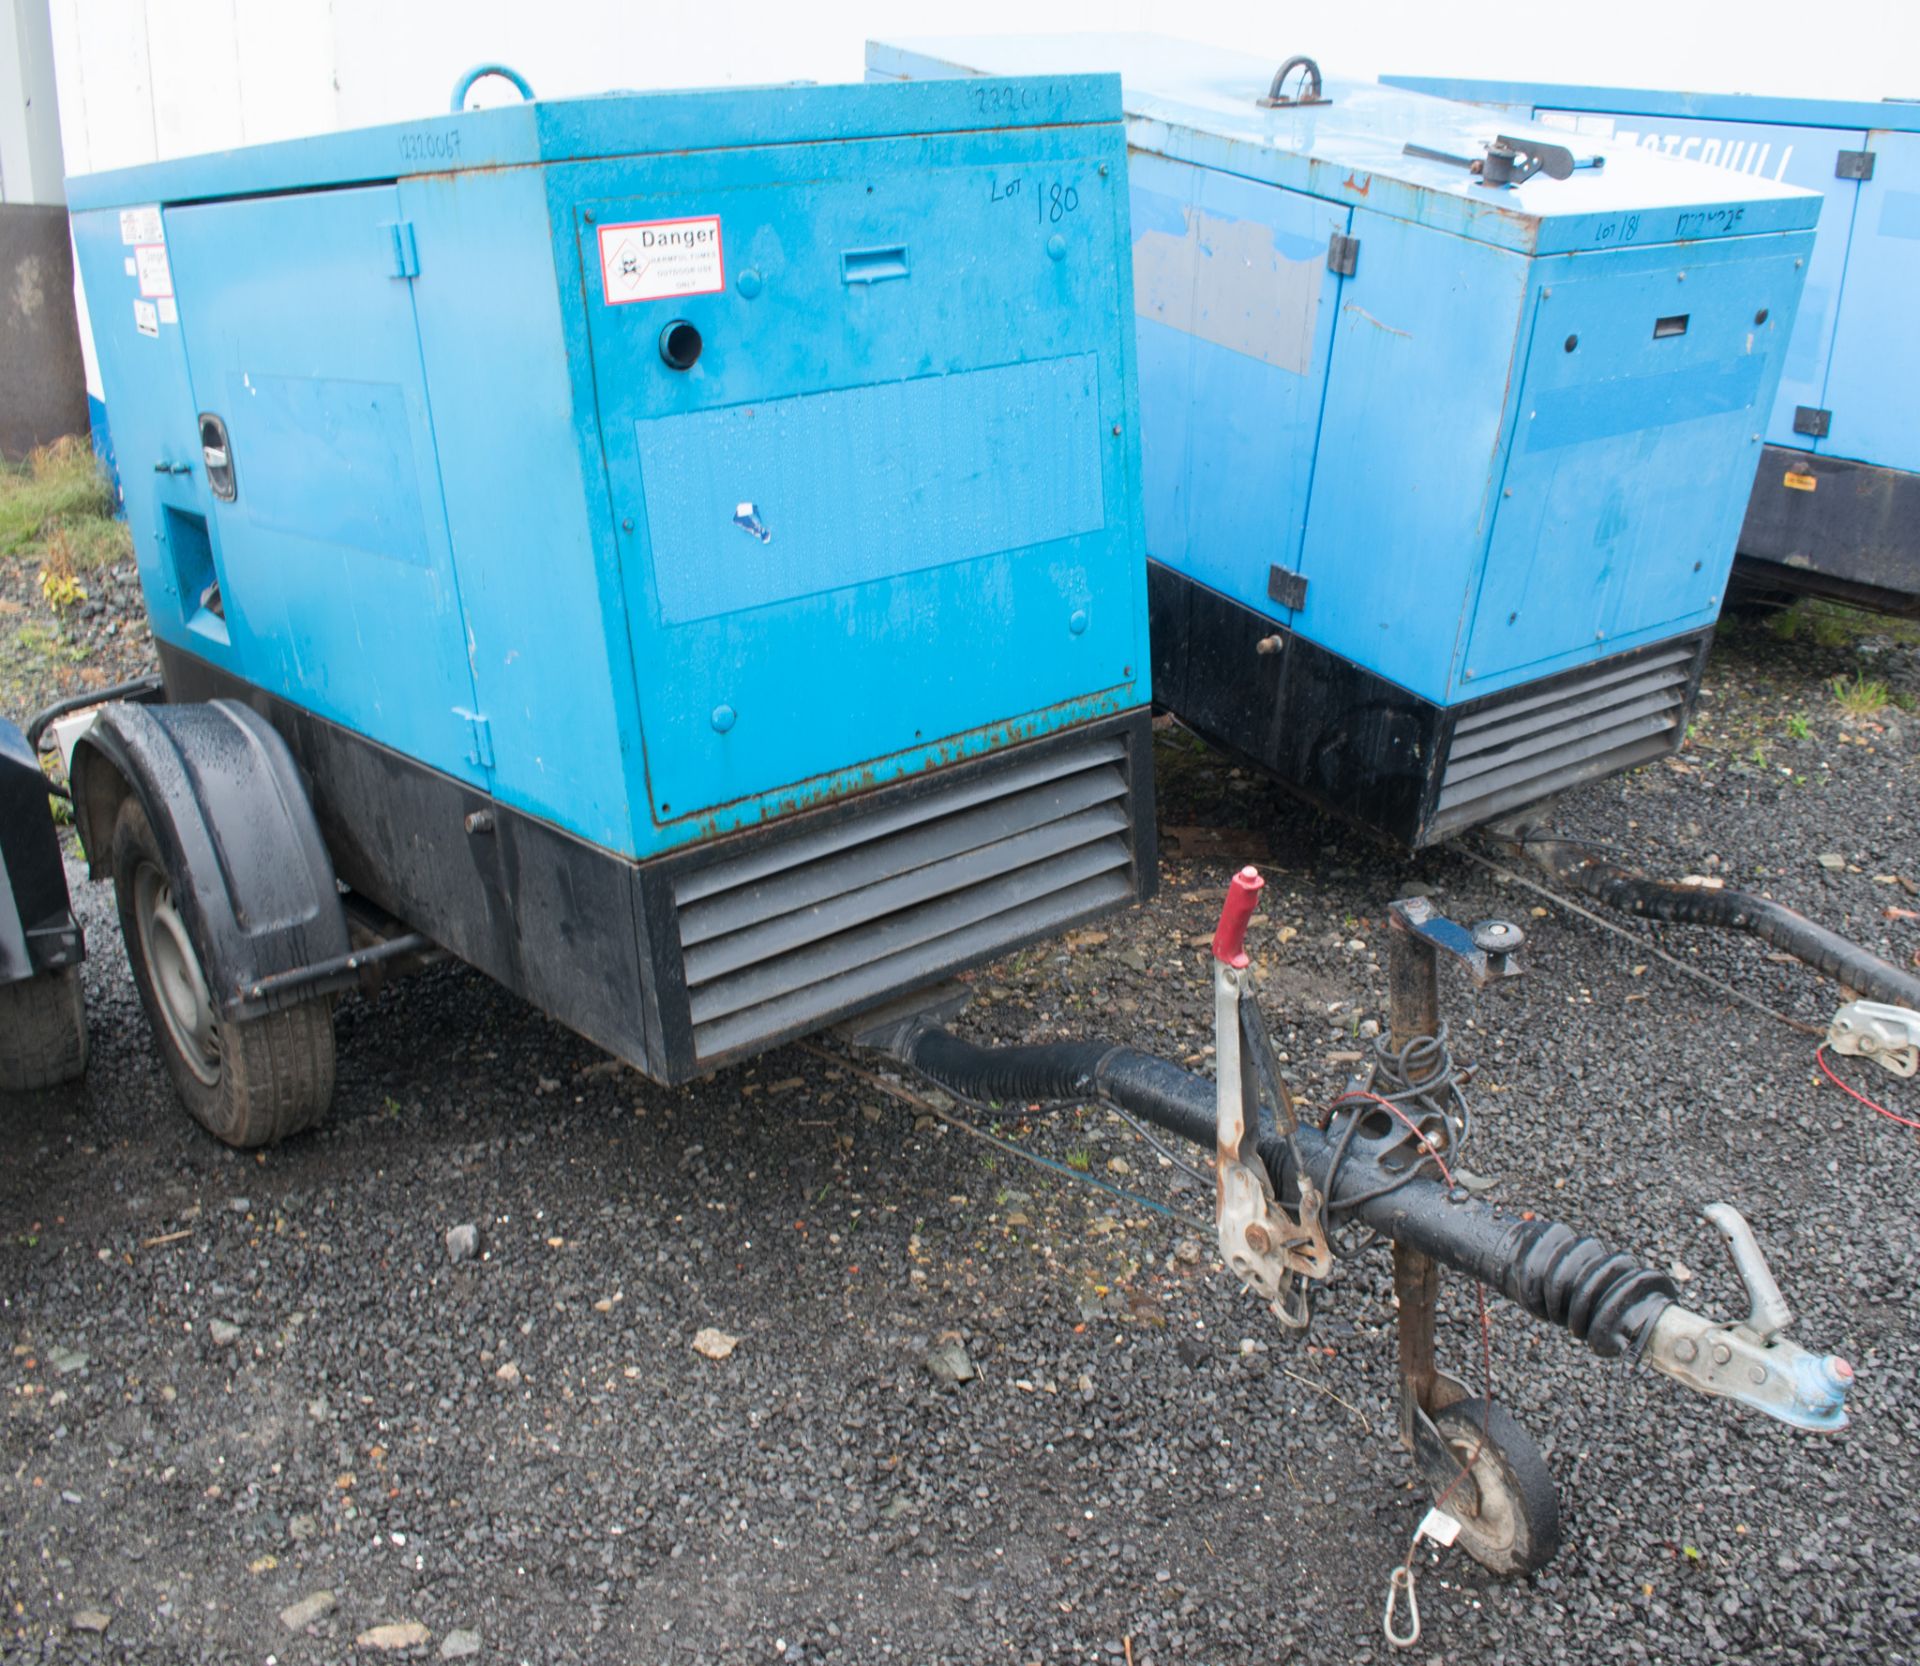 STEPHILL SSDX 20 20 Kva diesel driven fast tow generator Recorded hours: 15602 12320067